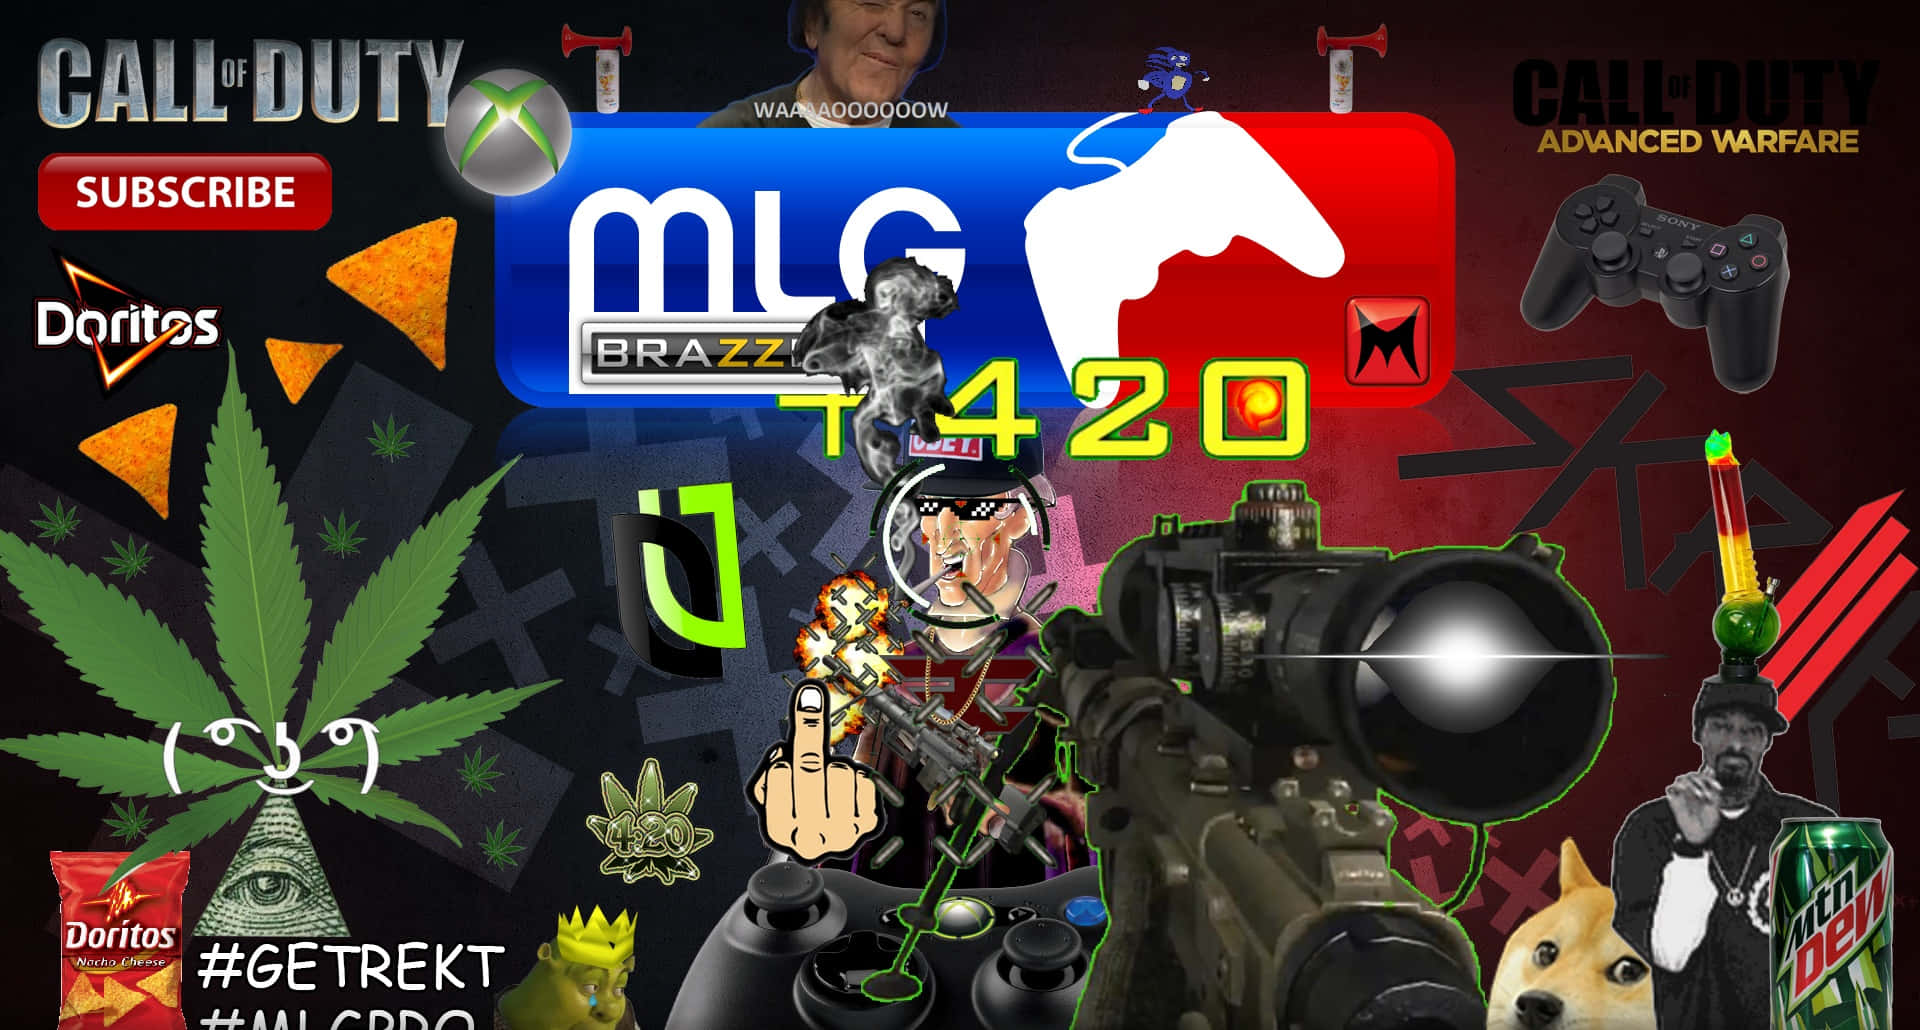 Step up your gaming experience with Professional MLG esports